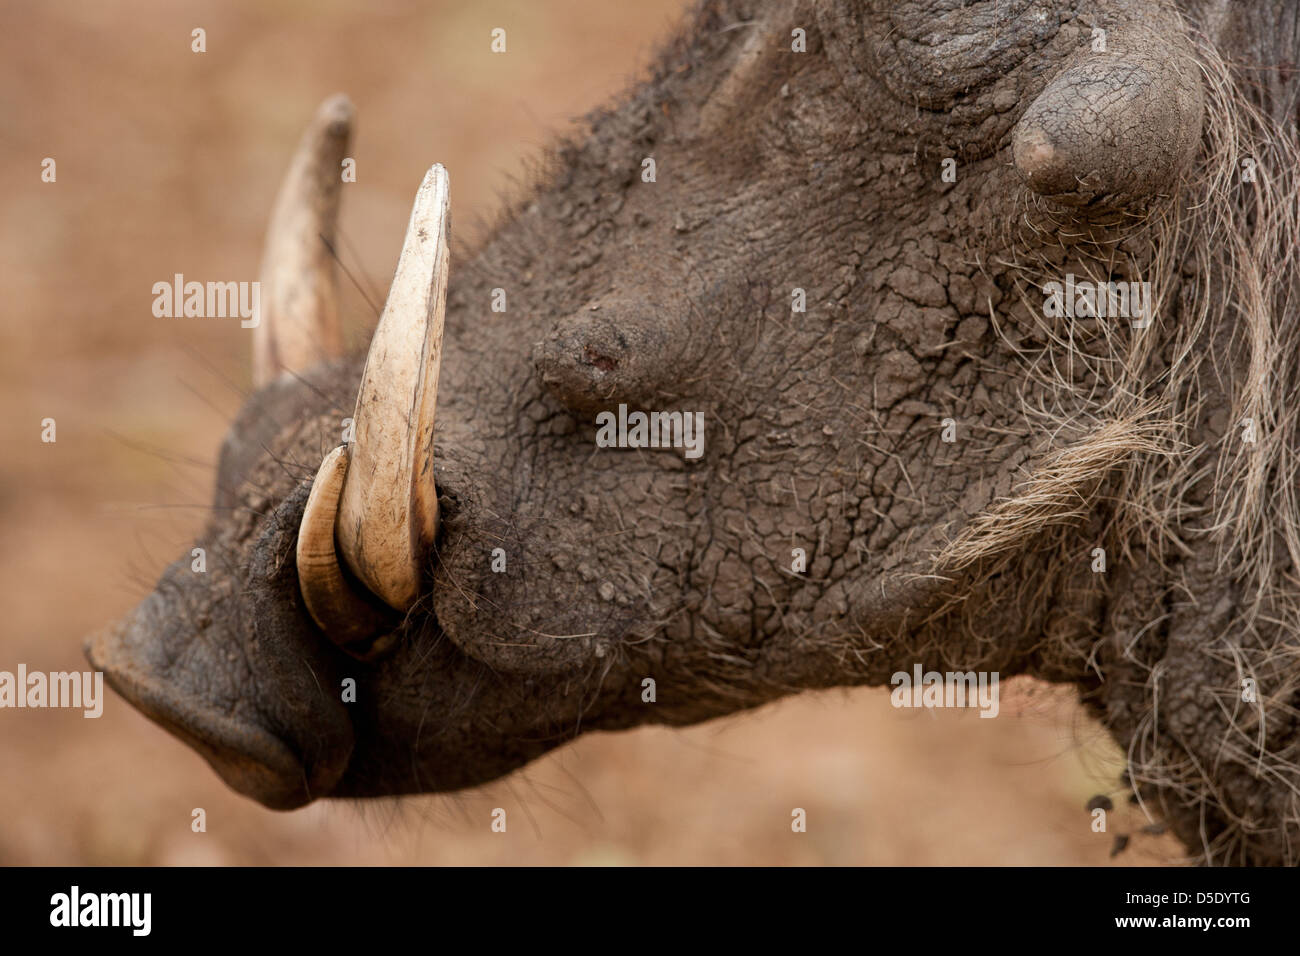 The tusks of Common Warthog in the grass (Phacochoerus africanus) Stock Photo